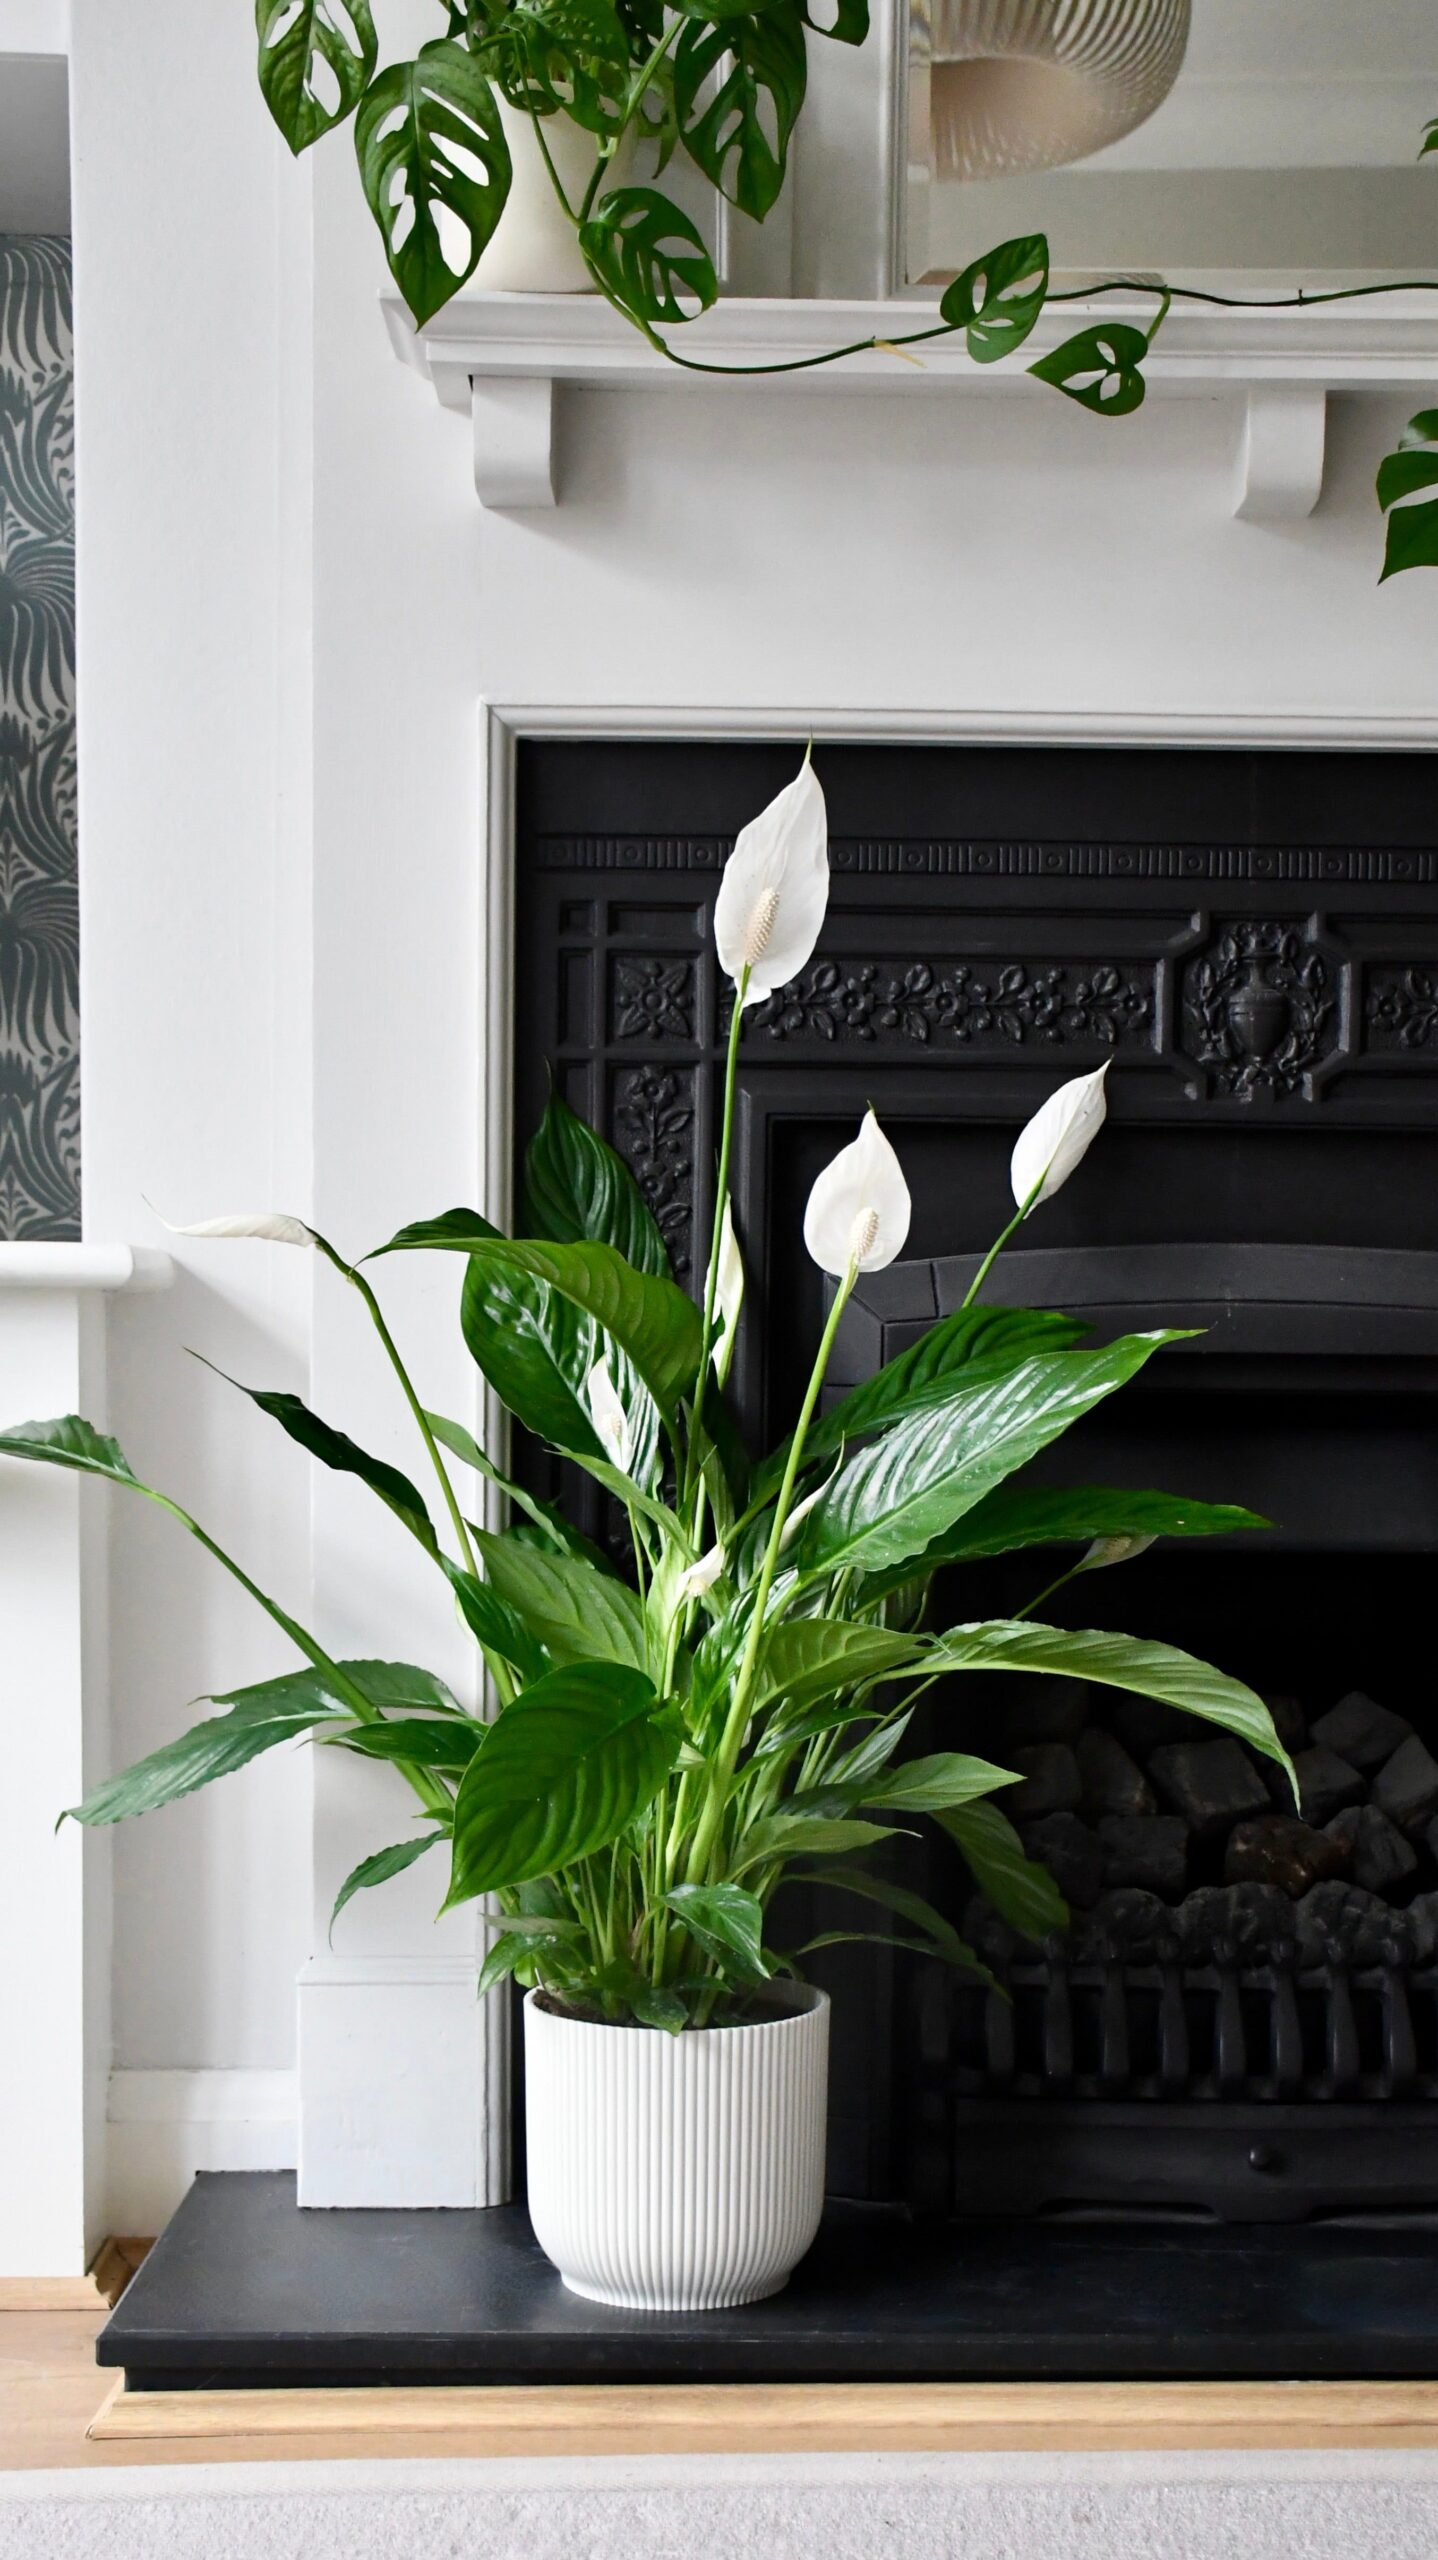 Buying Houseplants Tips for Finding the Perfect Indoor Plants at Your Local Garden Center